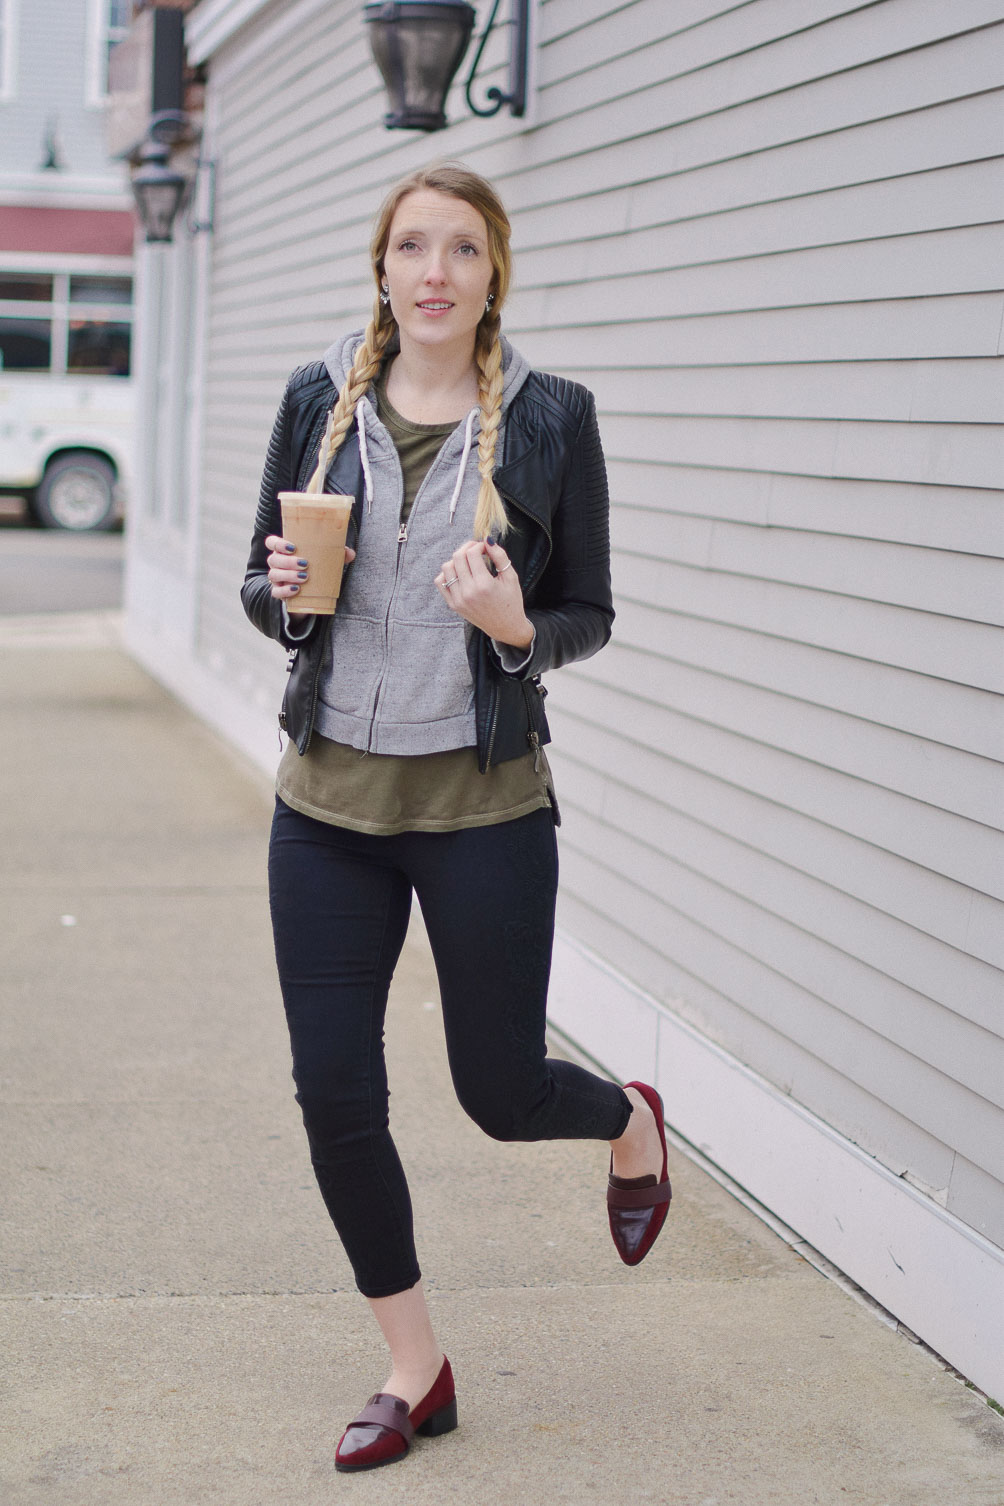 styling black embroidered denim with a vegan leather jacket and oxblood block heel loafers